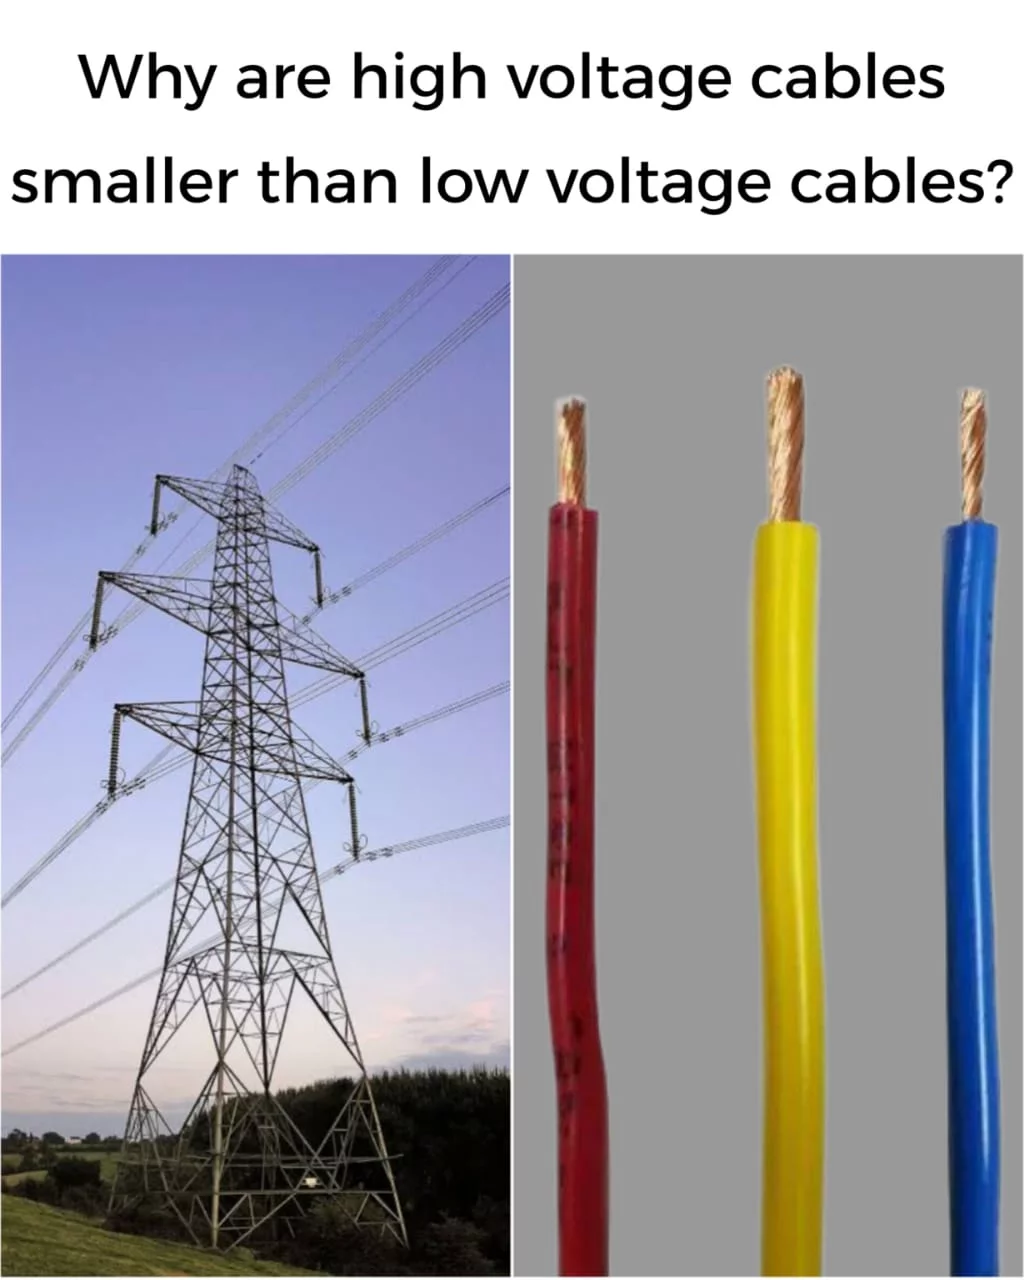 Why are high-voltage cables smaller than low-voltage cables?